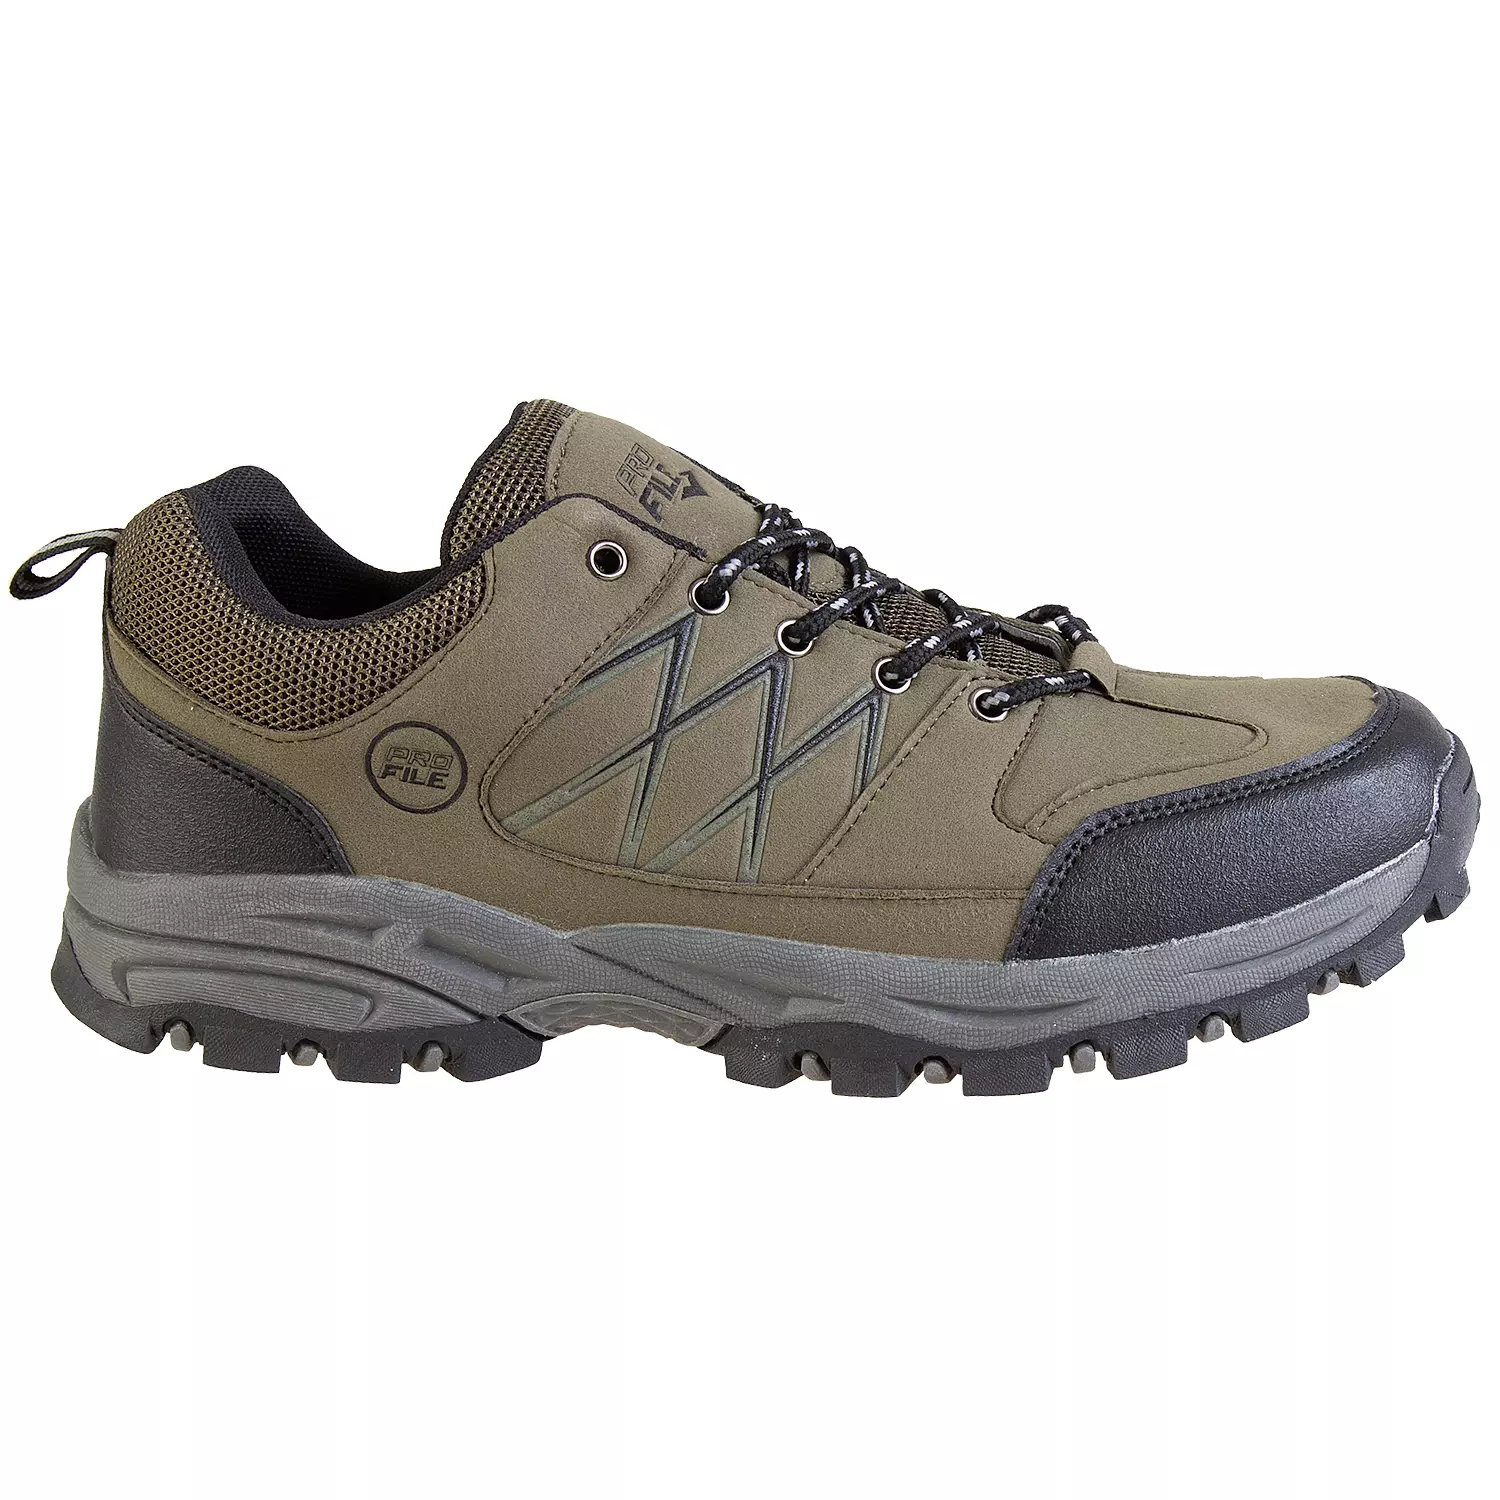 Men's low top hiking shoes with reflective strips, khaki, size 7